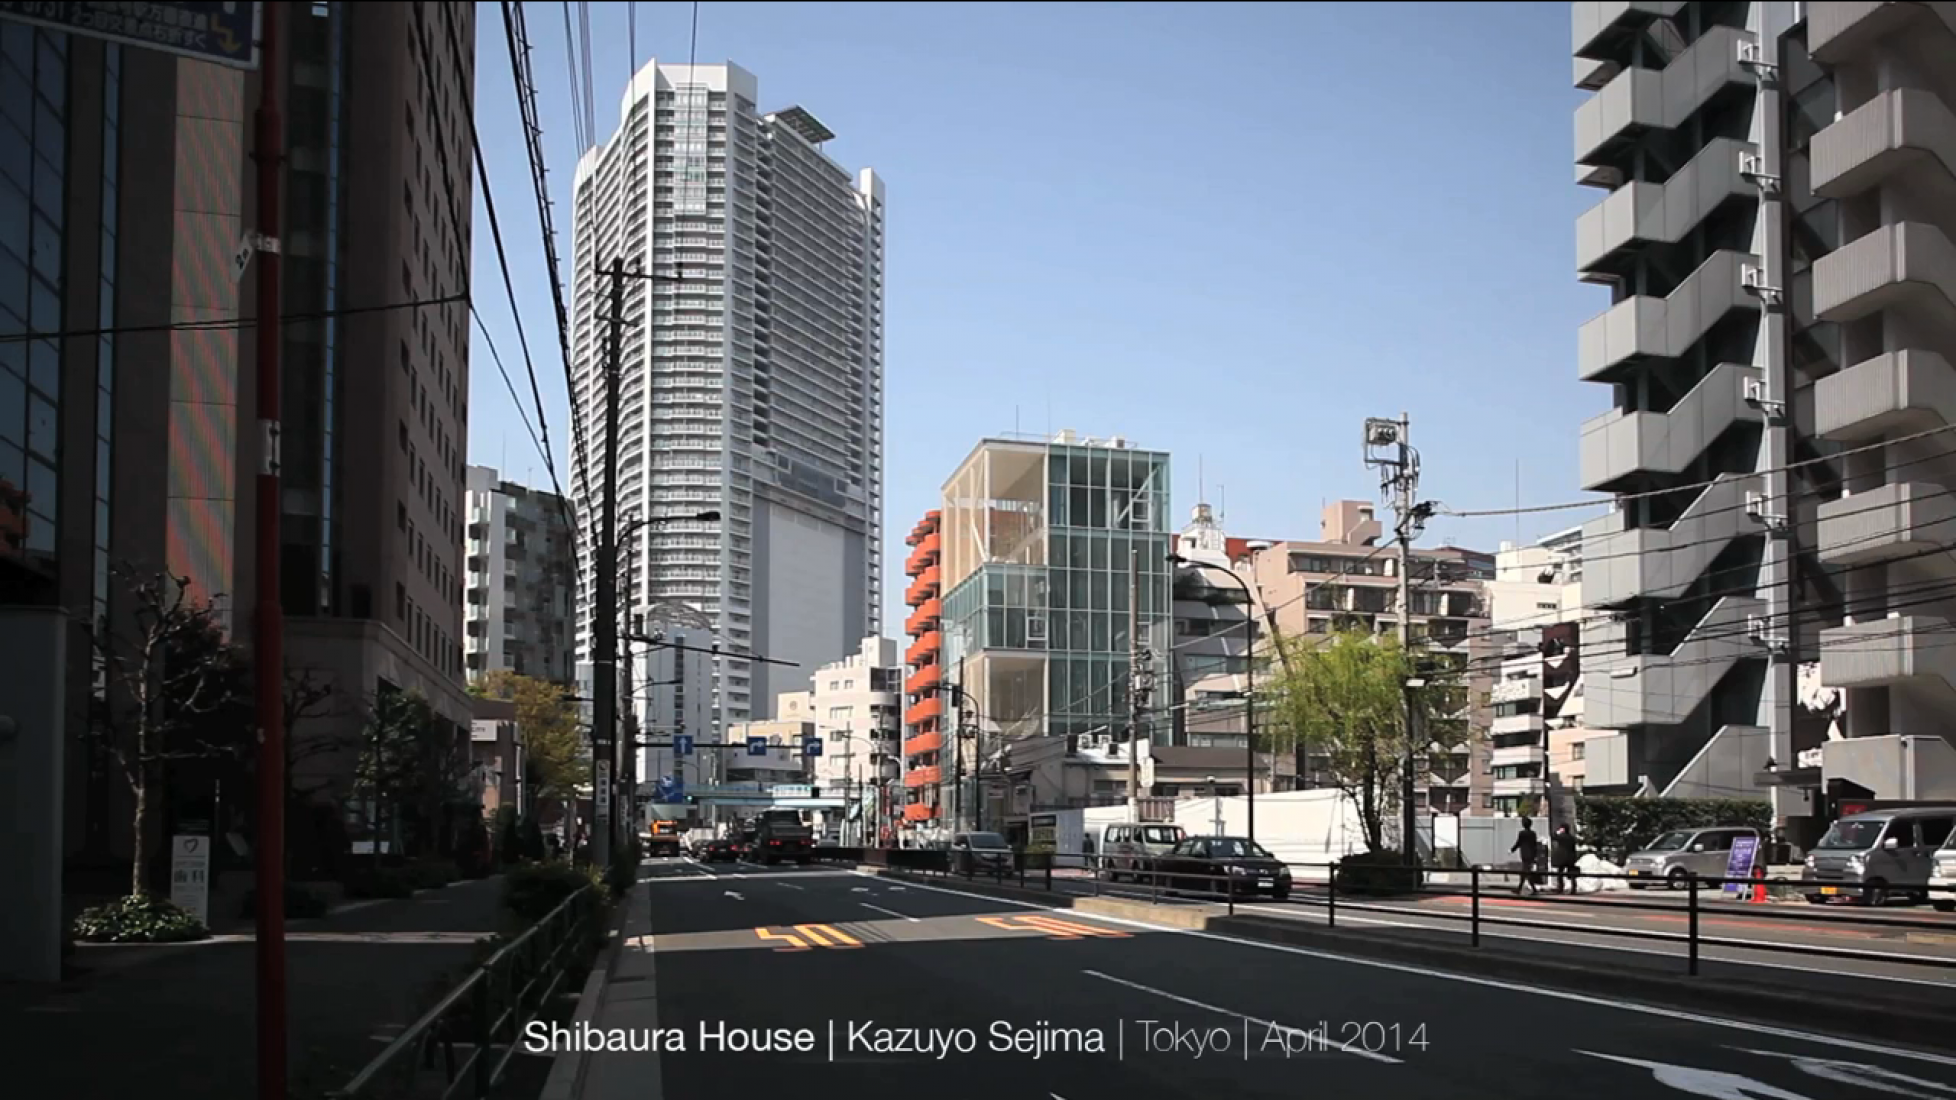 Shibaura House by Kazuyo Sejima. Video by Vincent Hecht.